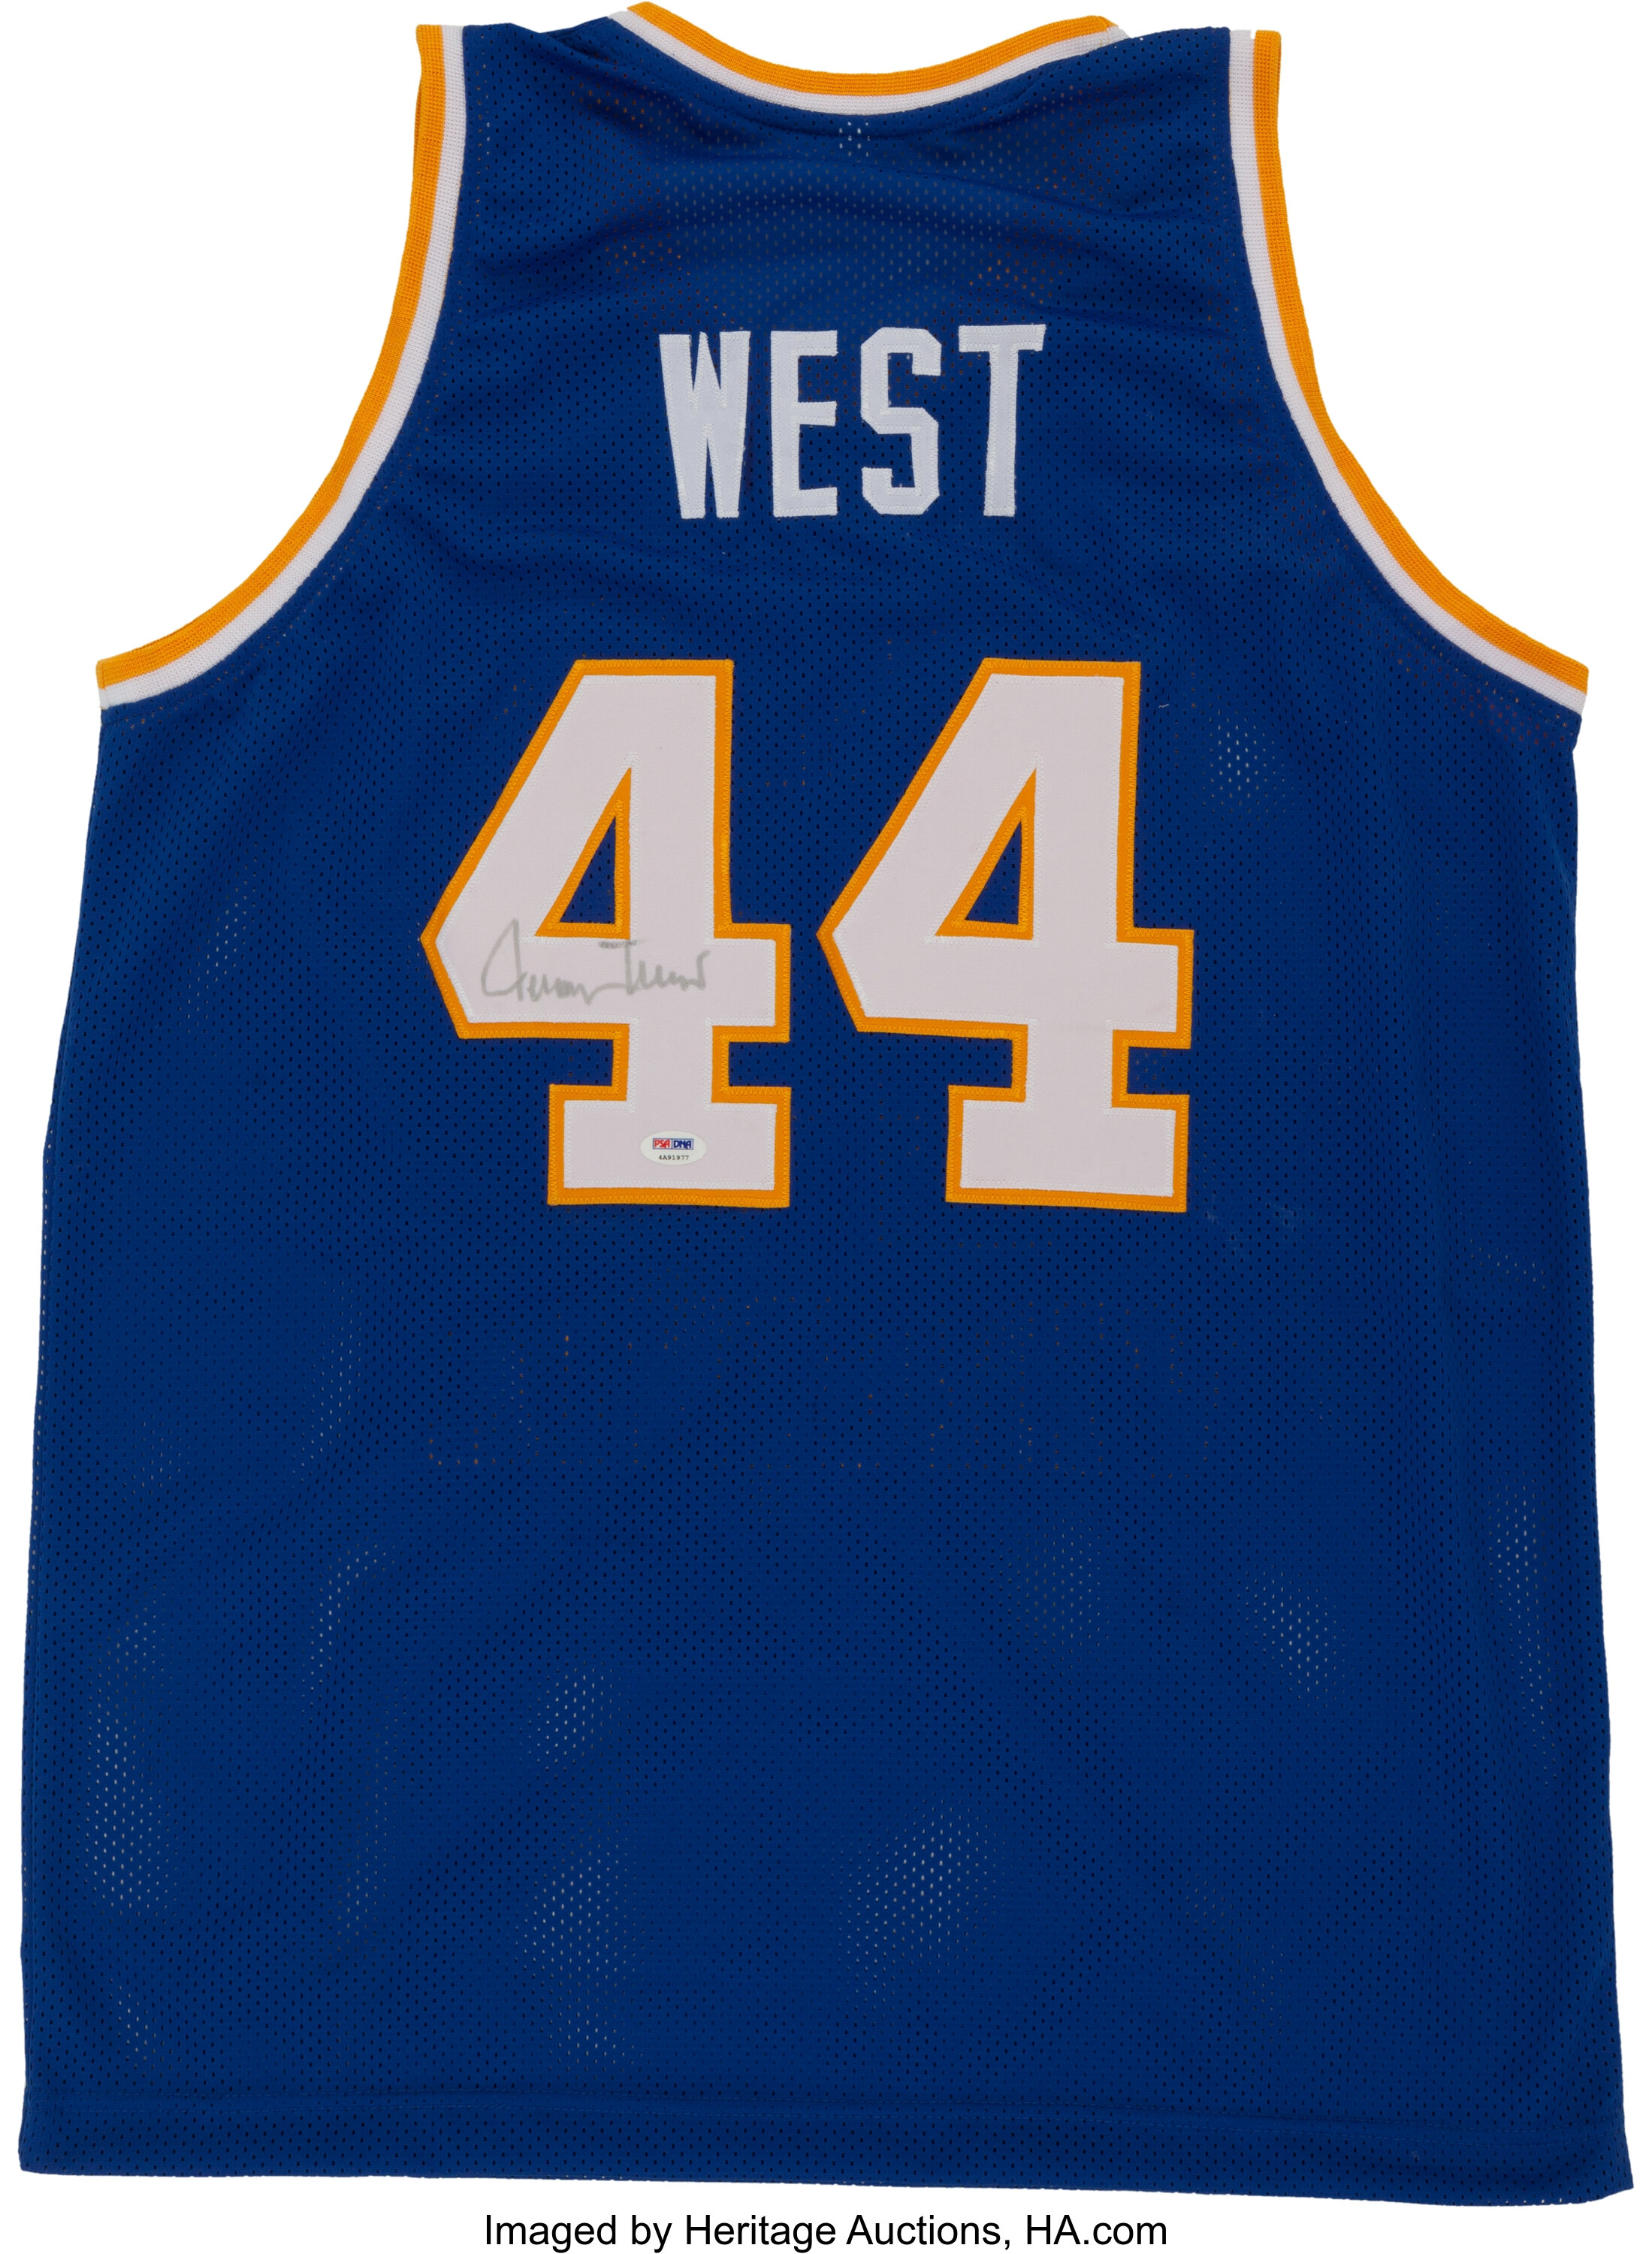 Jerry West Jersey with SI,ball,and shoe display!